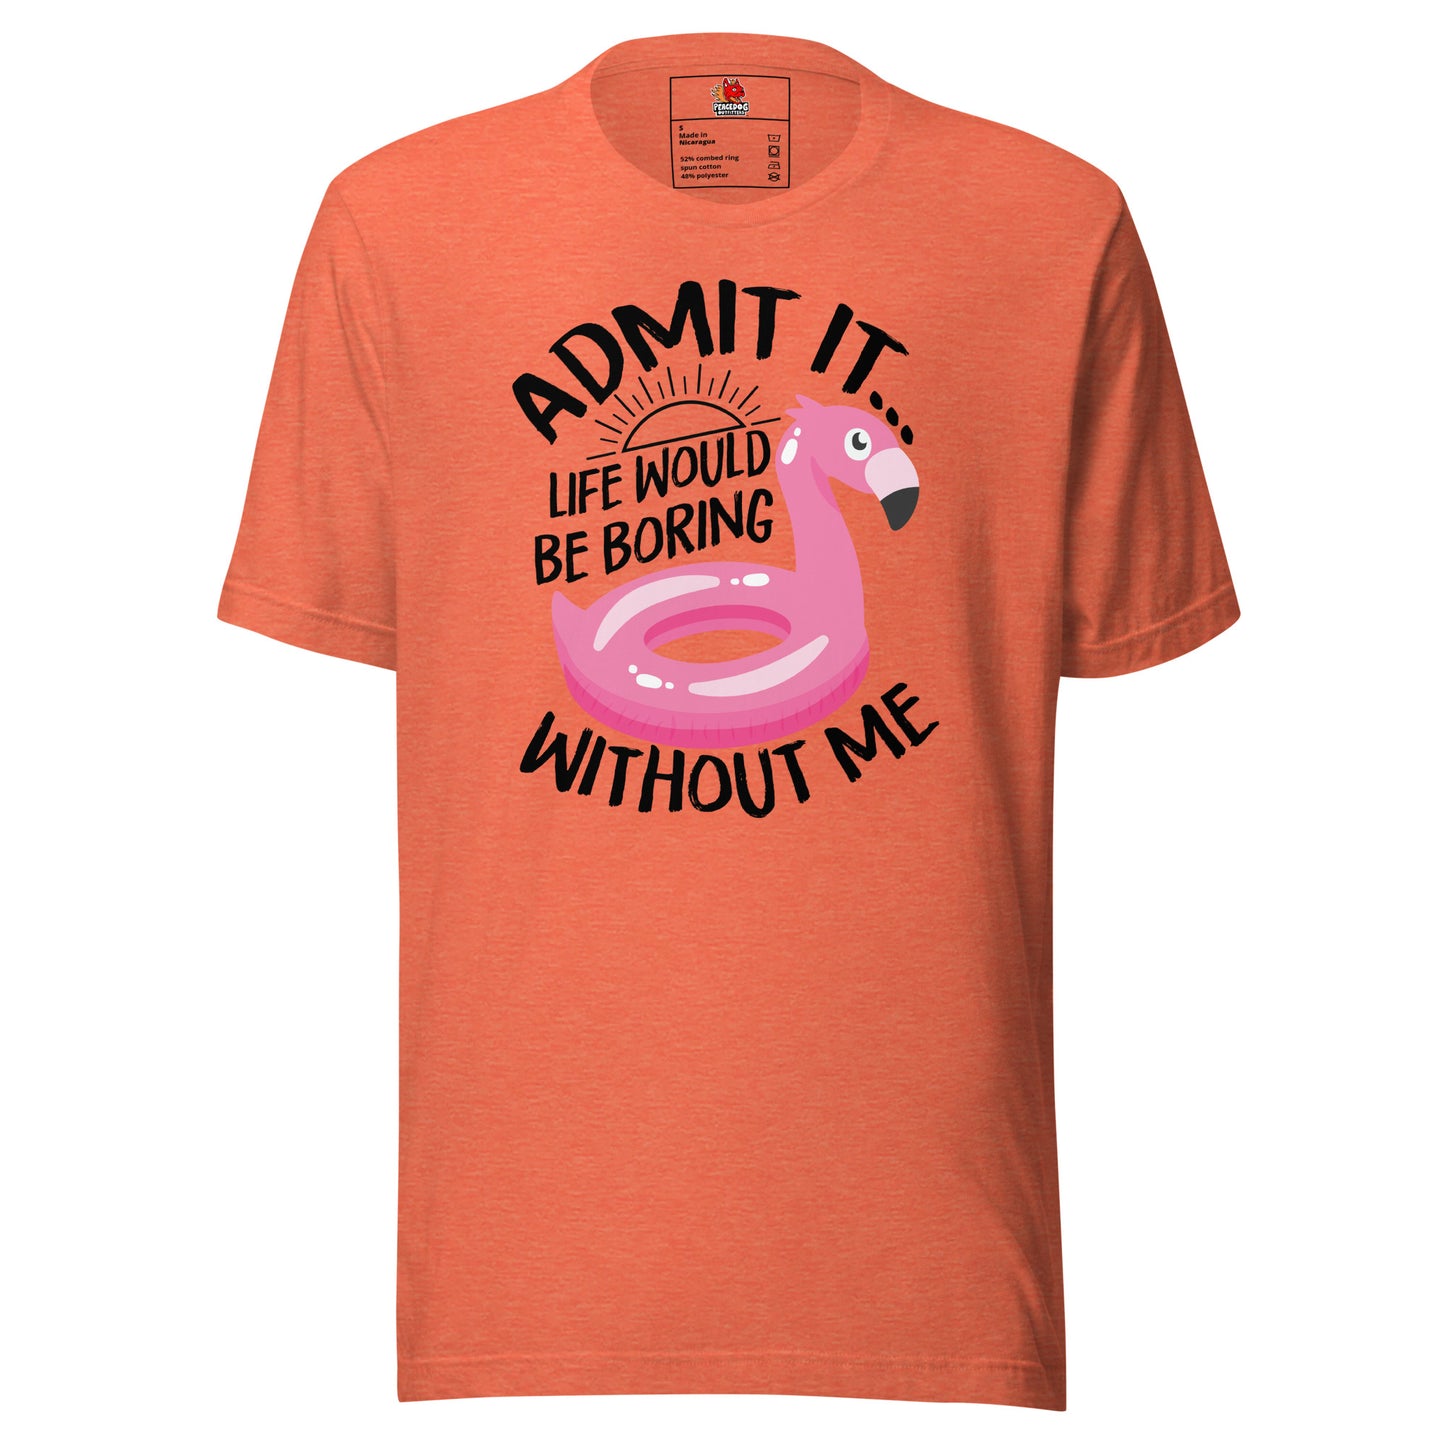 Admit it. Life would be Boring Without Me  T-shirt